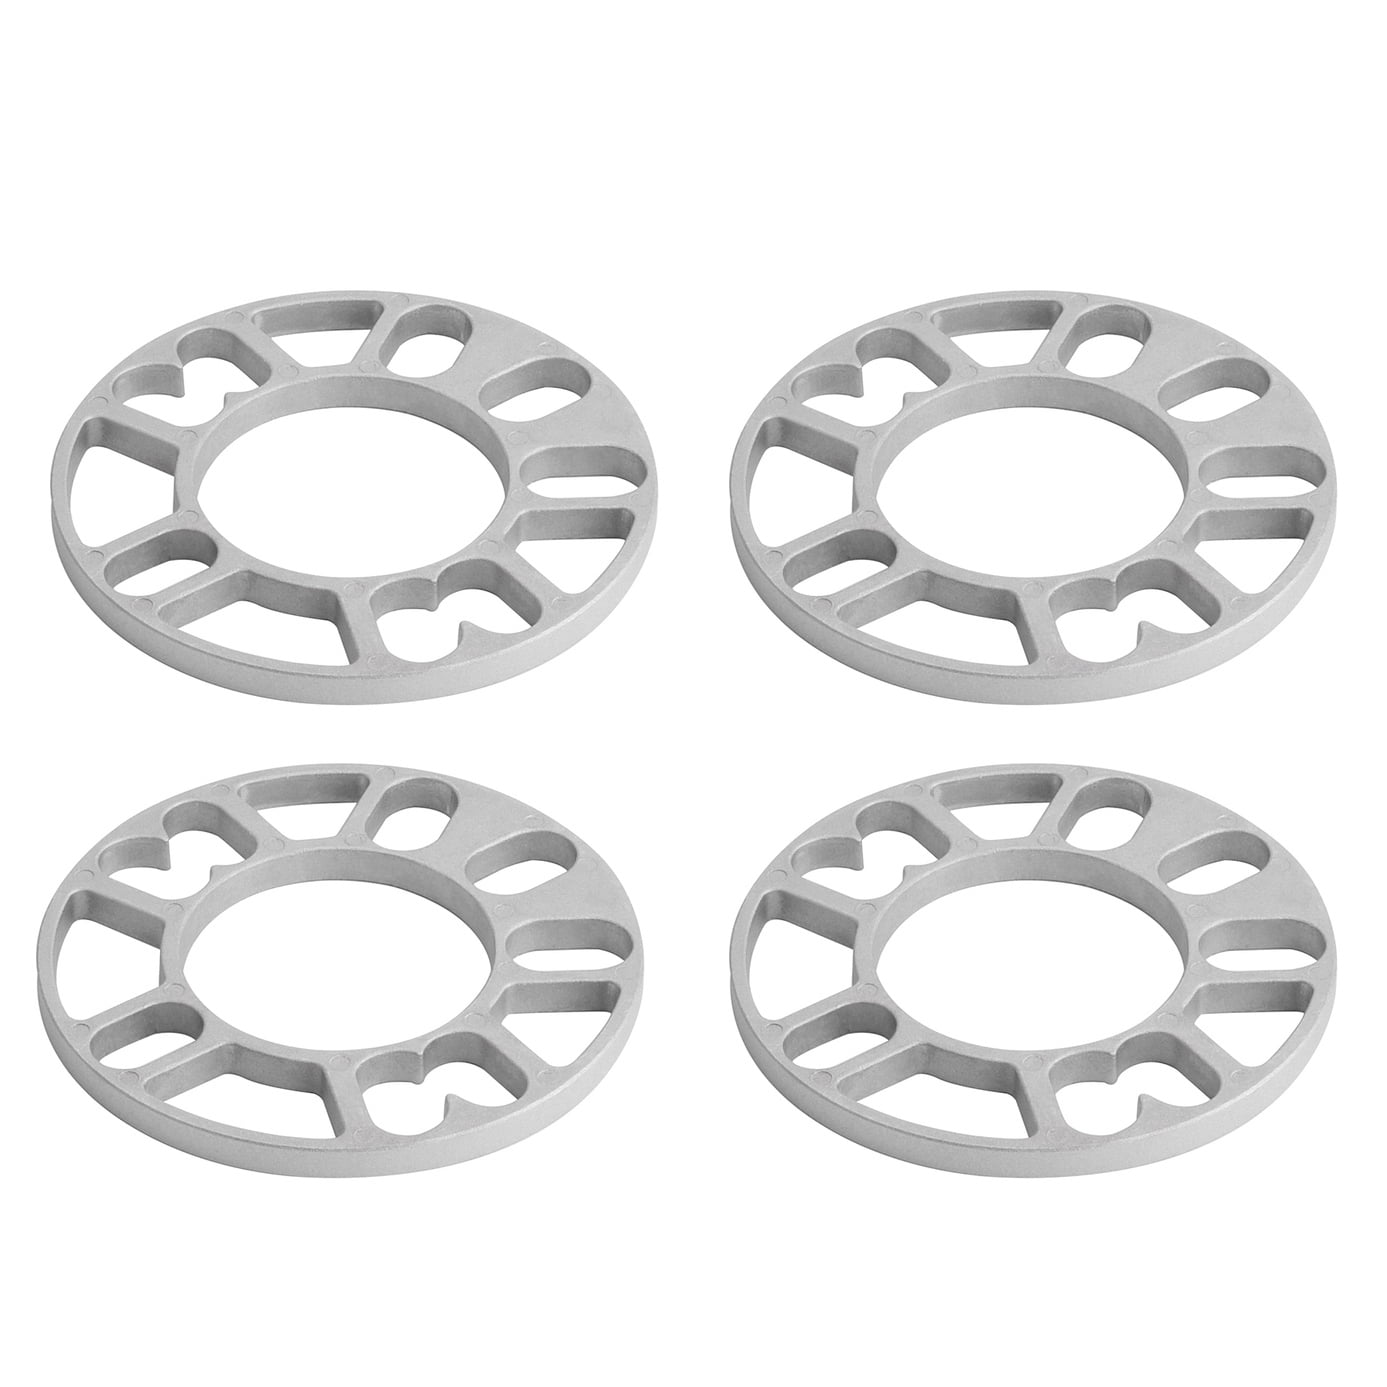 4Pcs 3-10mm Aluminum Alloy Wheel Spacers Shims Spacer Universal 4 & 5 Stud Fit❤